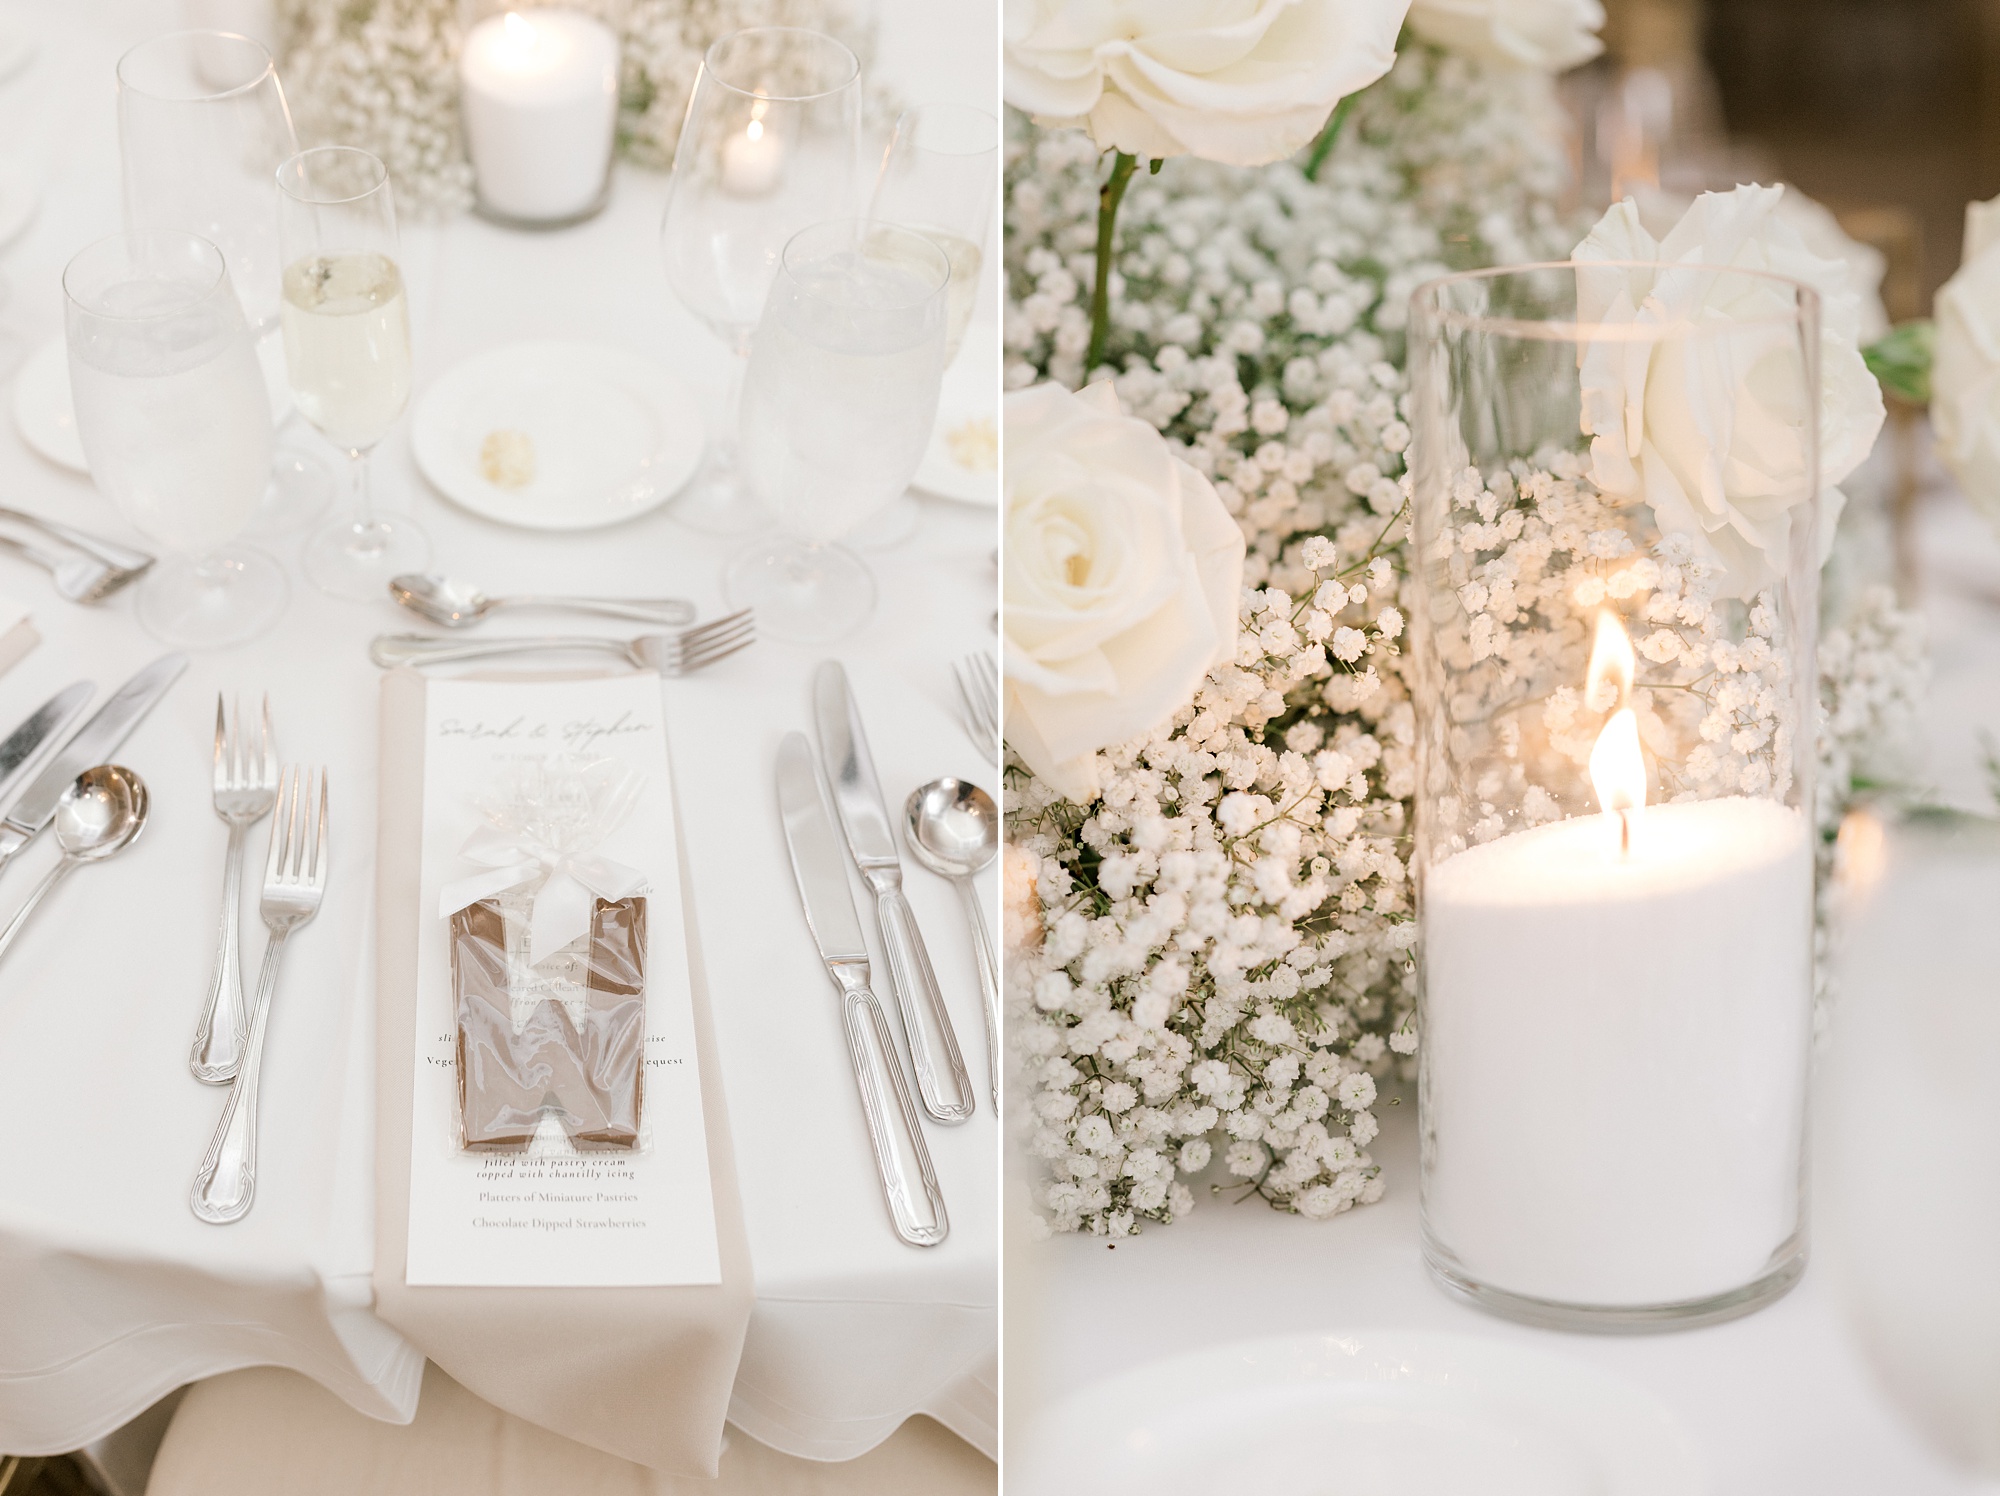 wedding reception centerpieces with baby's breath and white candles